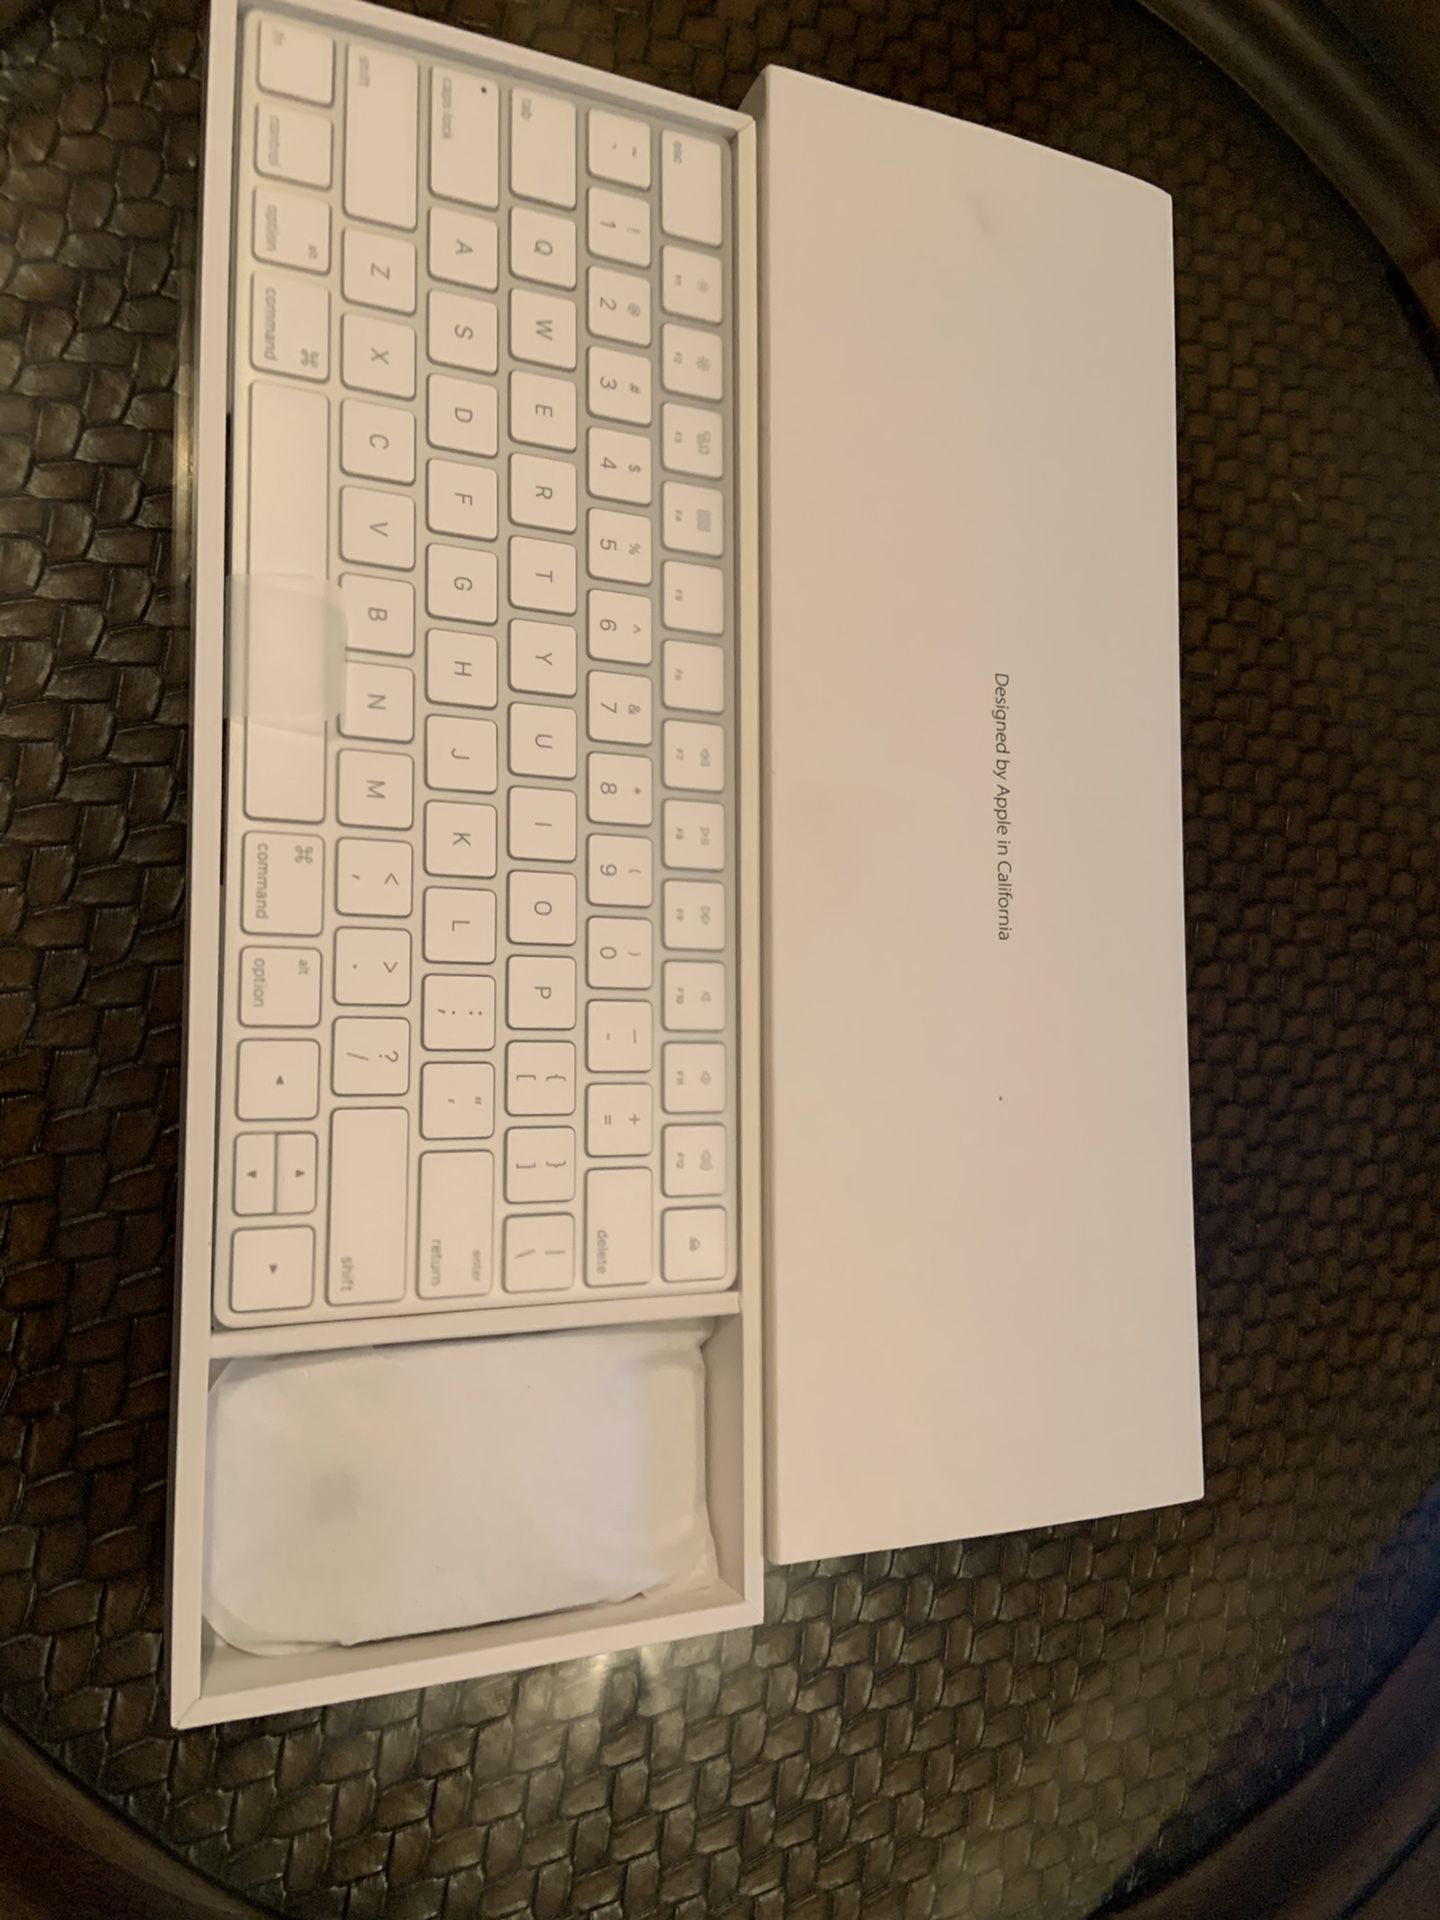 New Apple Keyboard And Magic Mouse 2